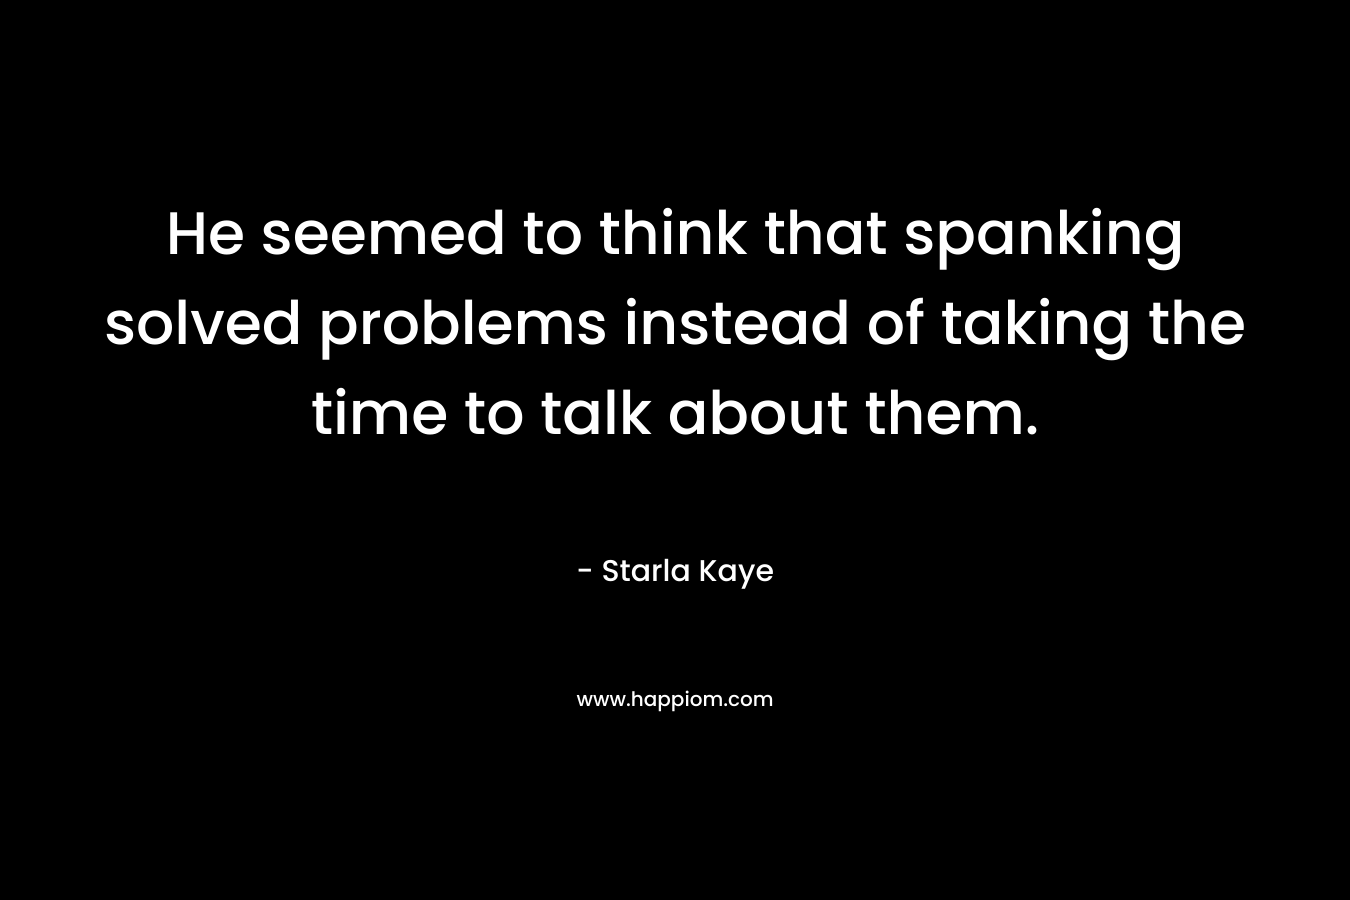 He seemed to think that spanking solved problems instead of taking the time to talk about them. – Starla Kaye